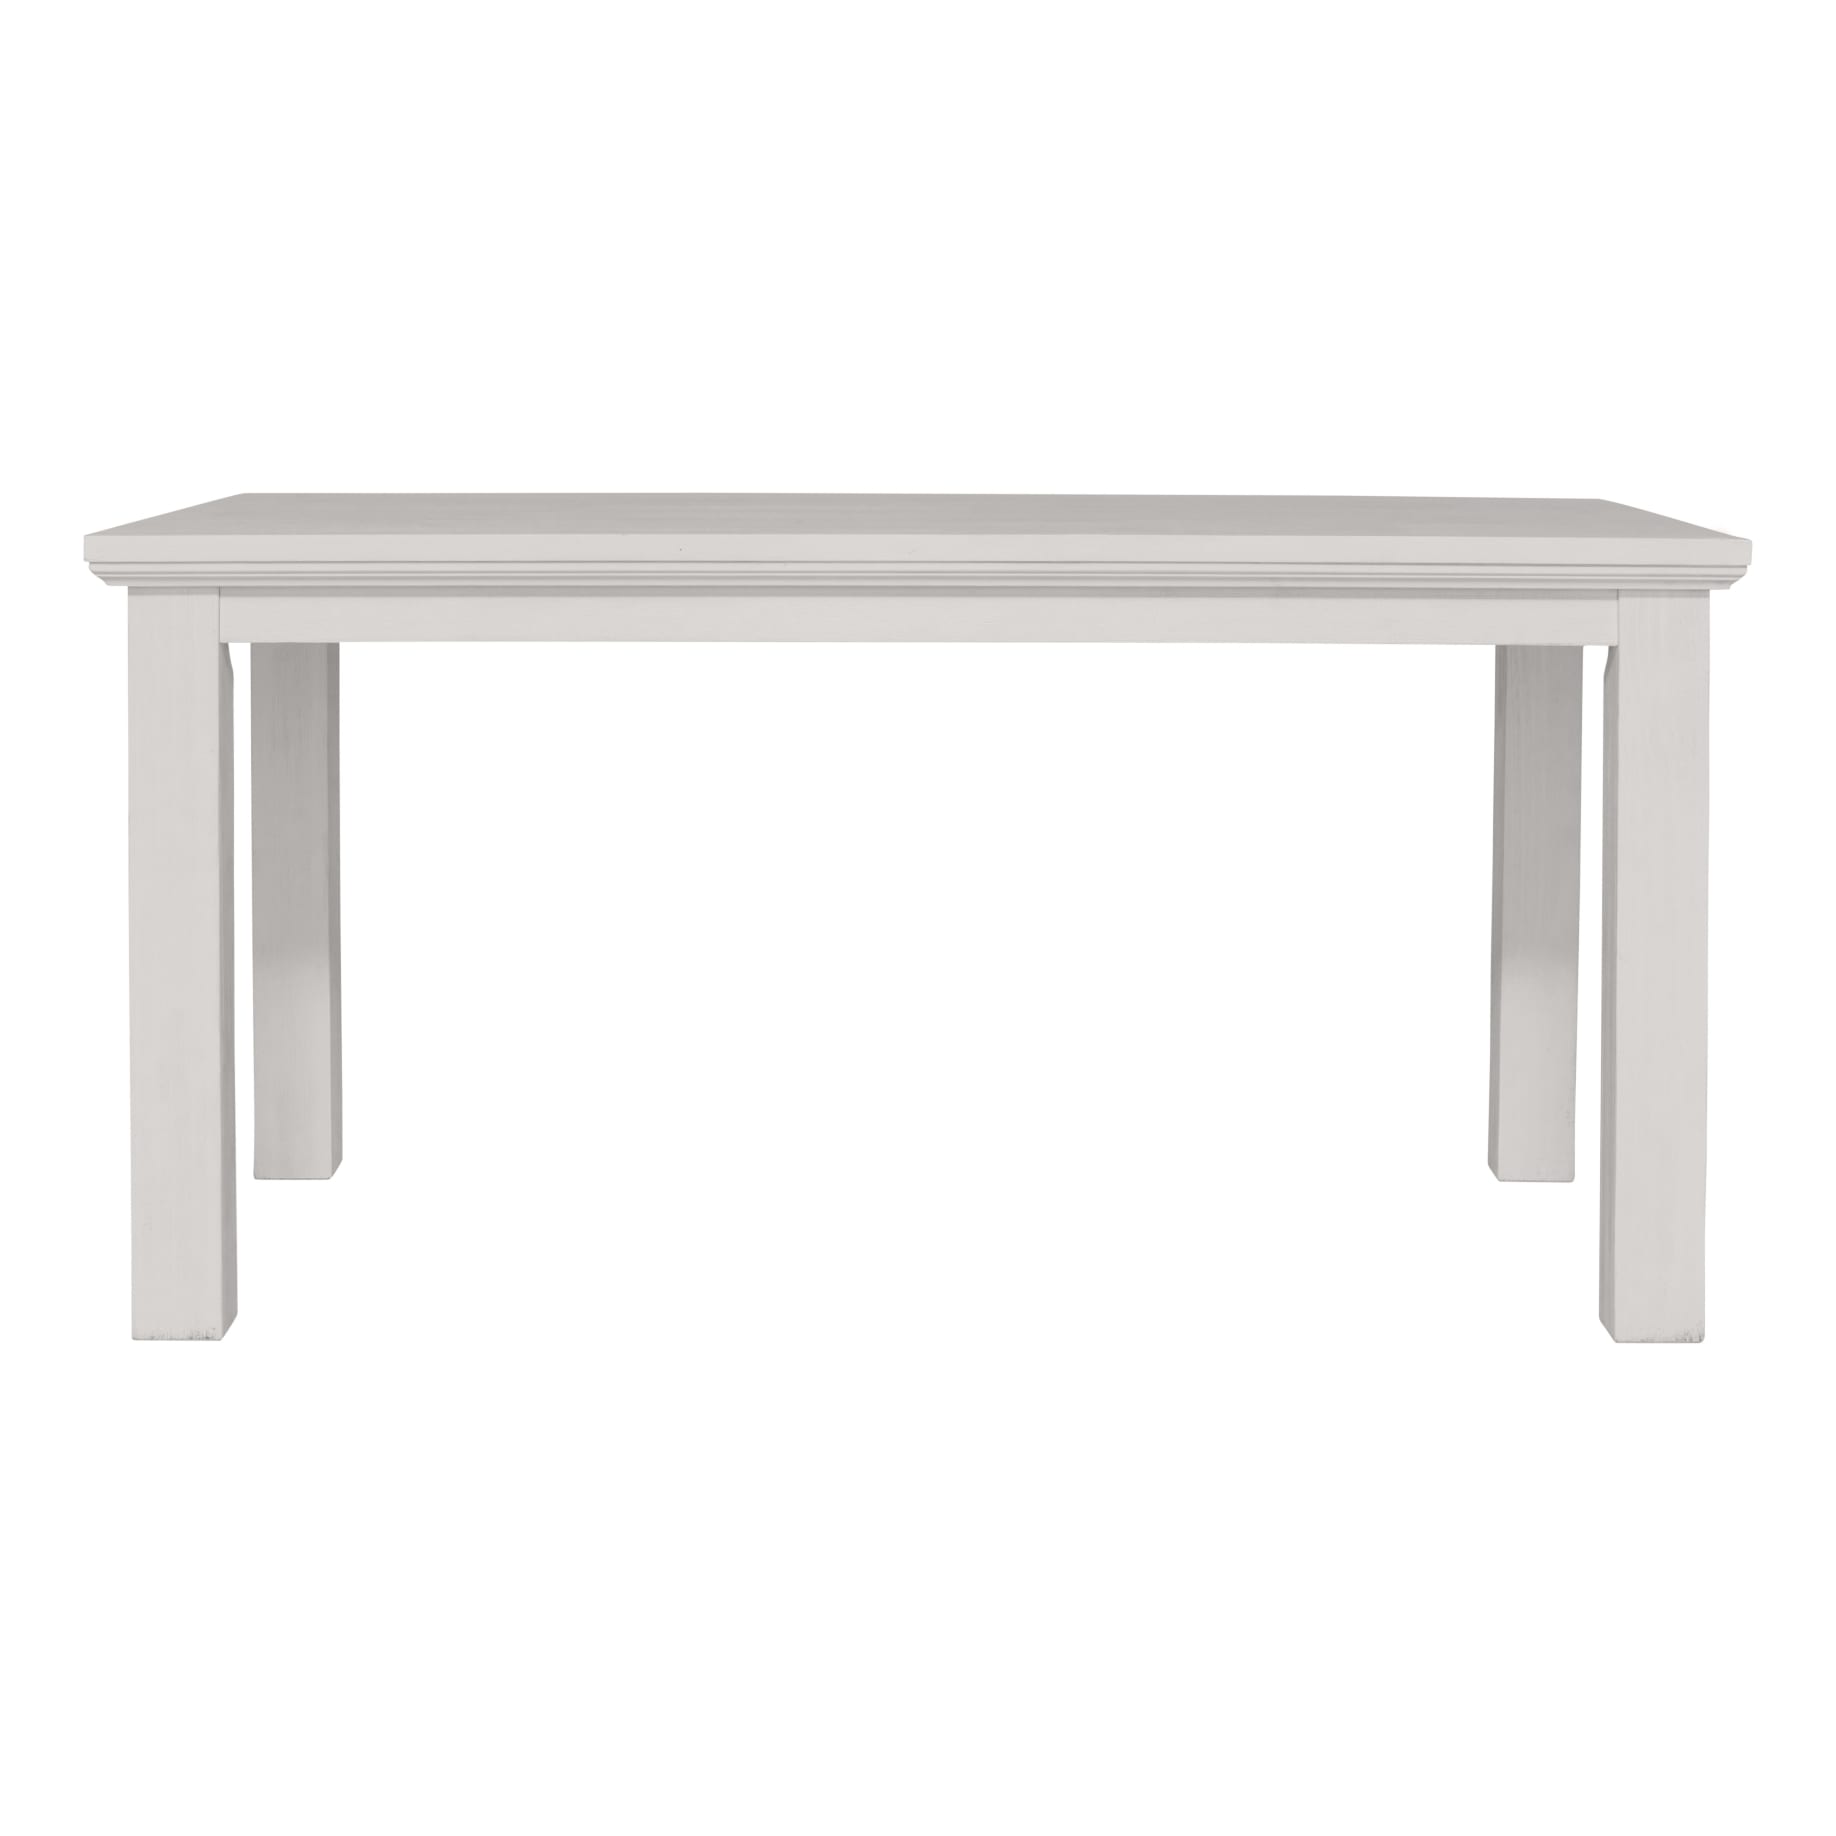 Hamptons Dining Table 160cm in White